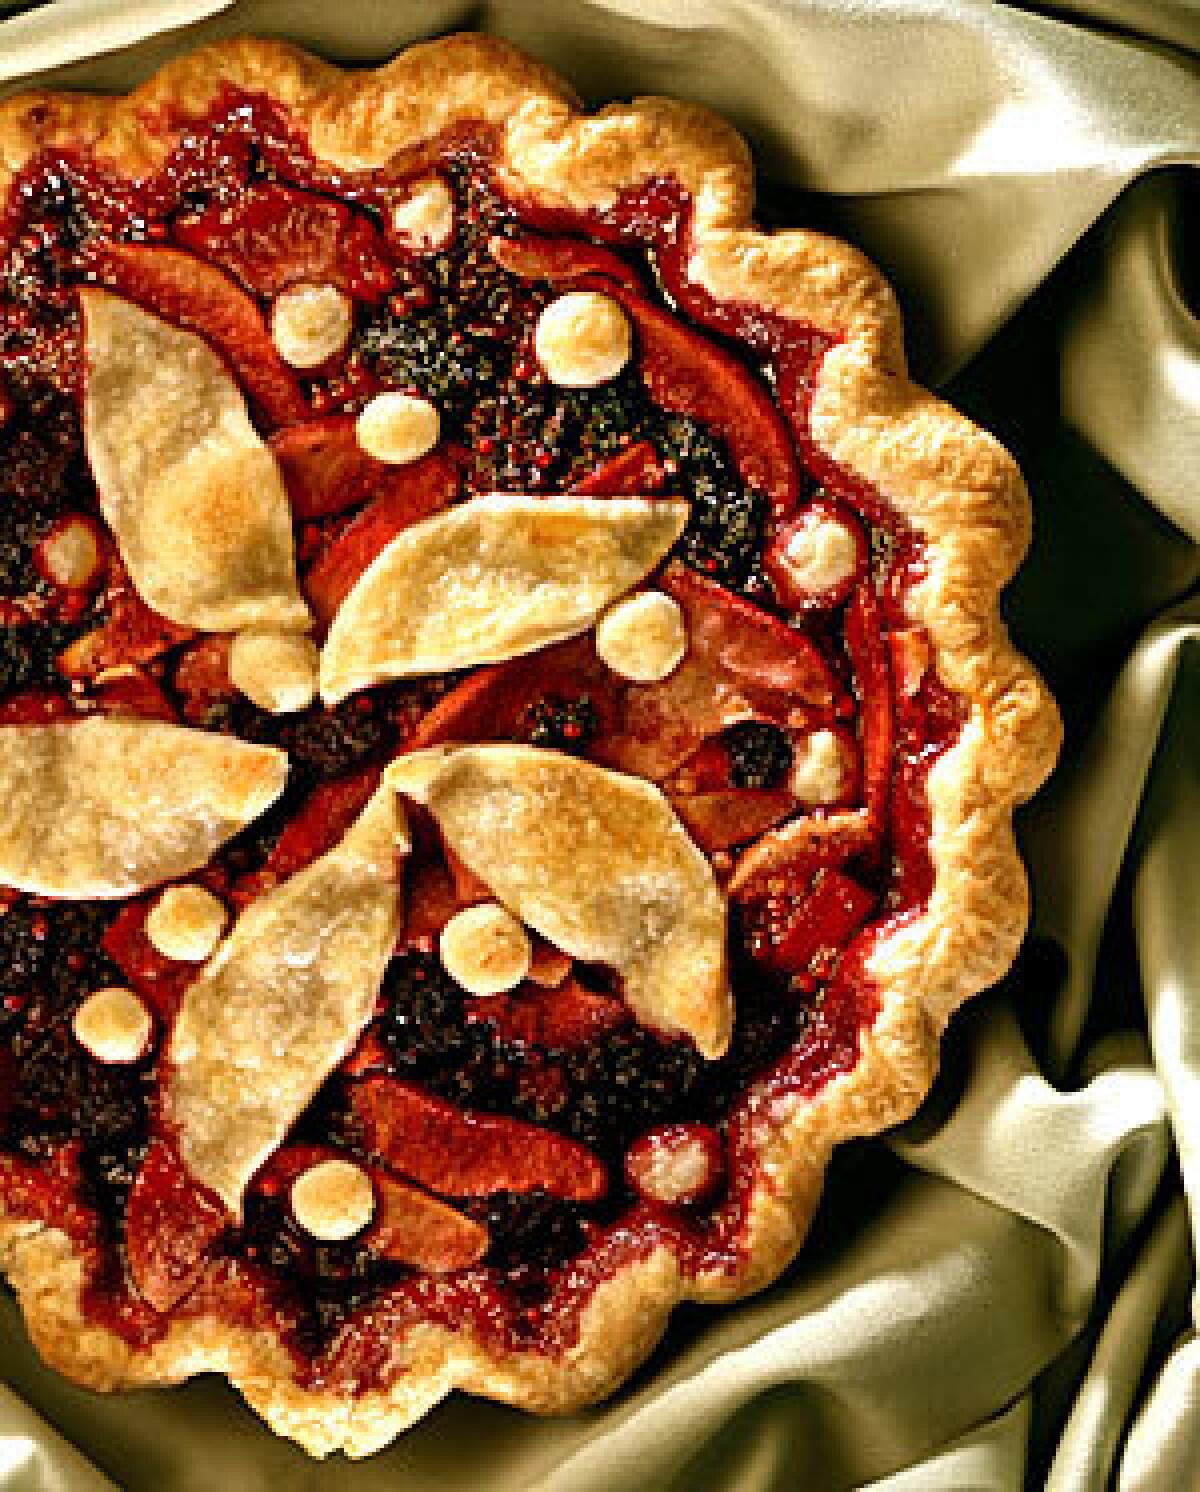 When you're bringing dessert for Thanksgiving, pie is a great way to go. Recipe: Pear-blackberry pie